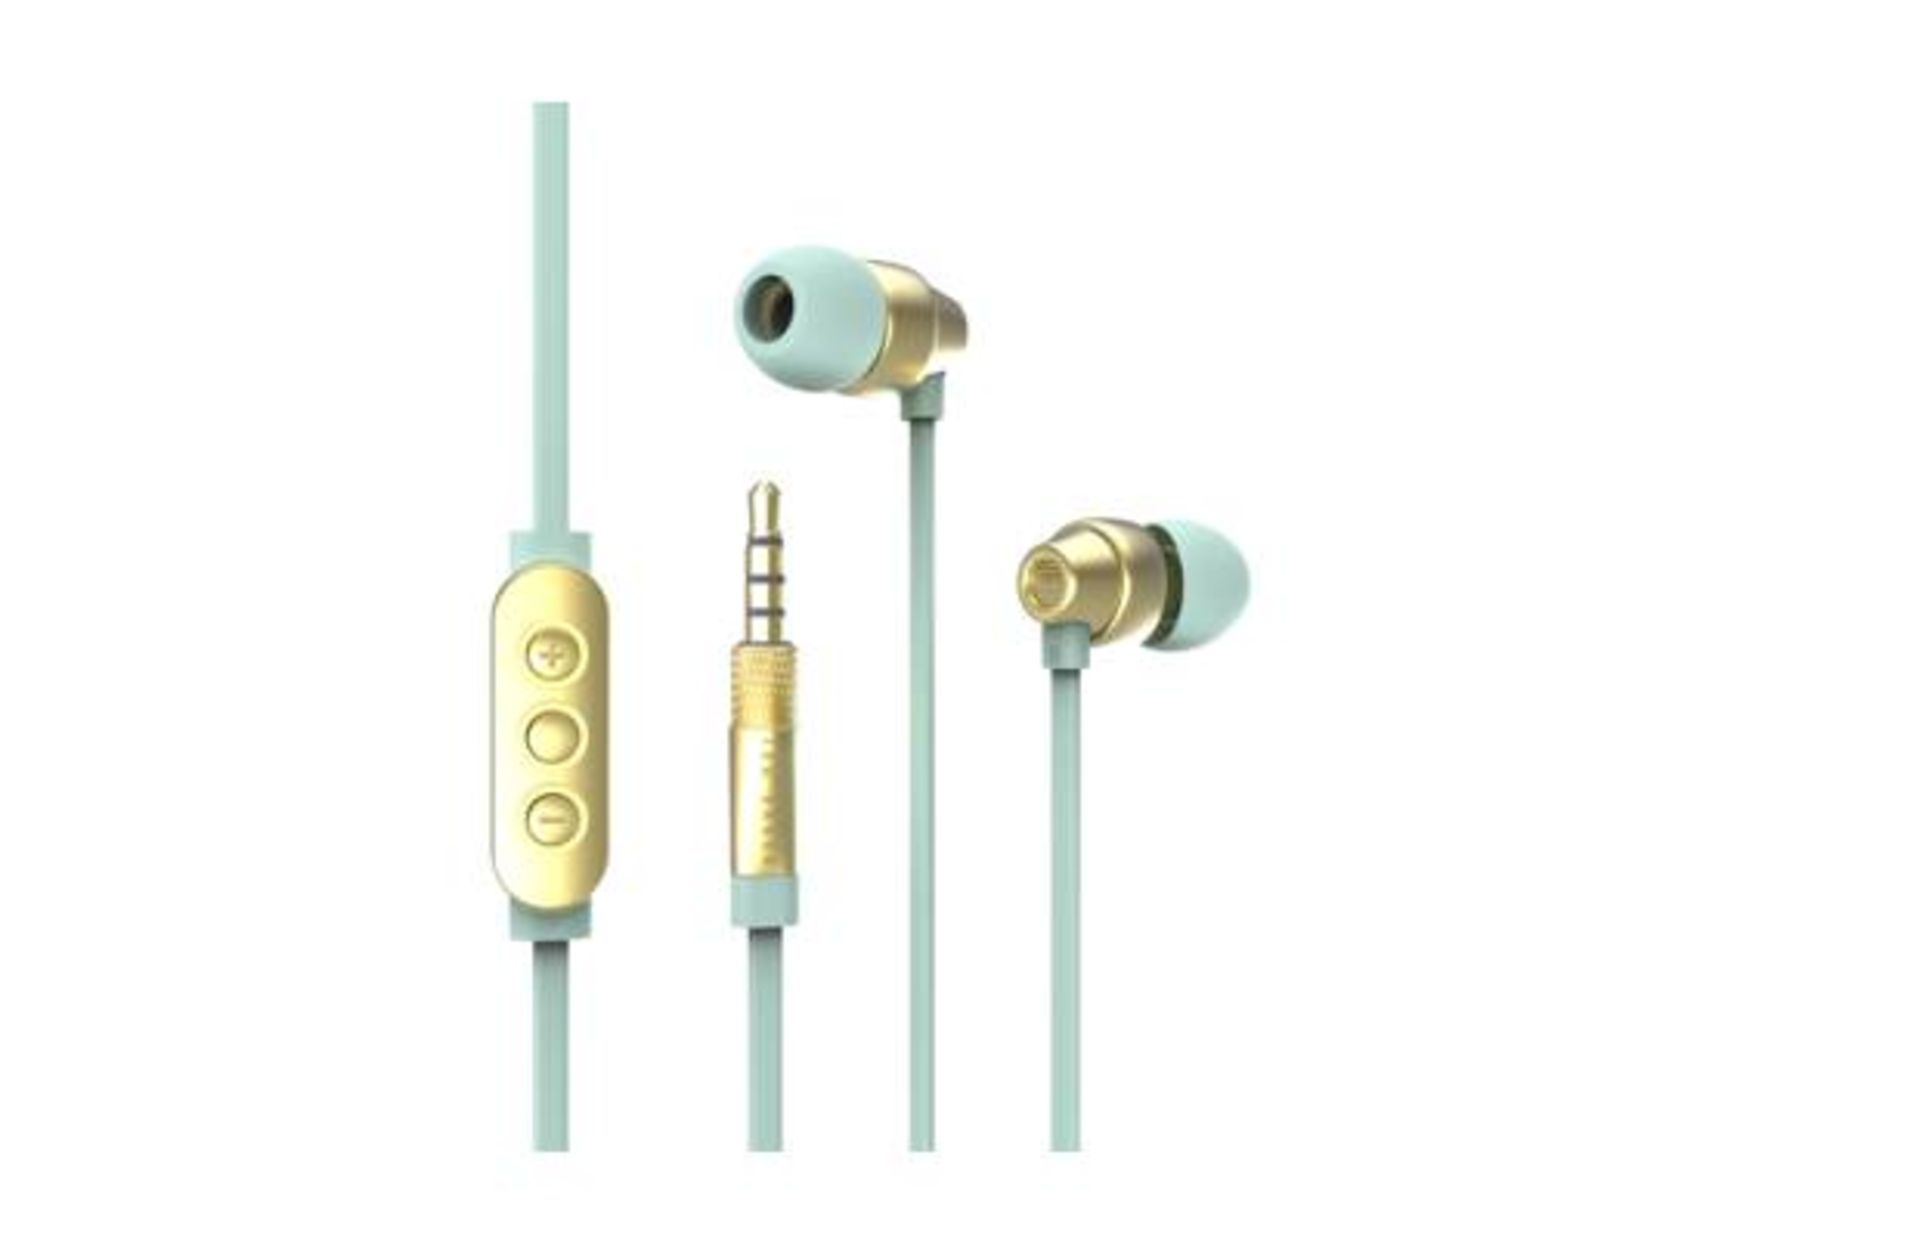 V *TRADE QTY* Brand New Ted Baker Dover In-Ear Headphones In Mint/Gold RRP£59.95 eBay£39.99 X 12